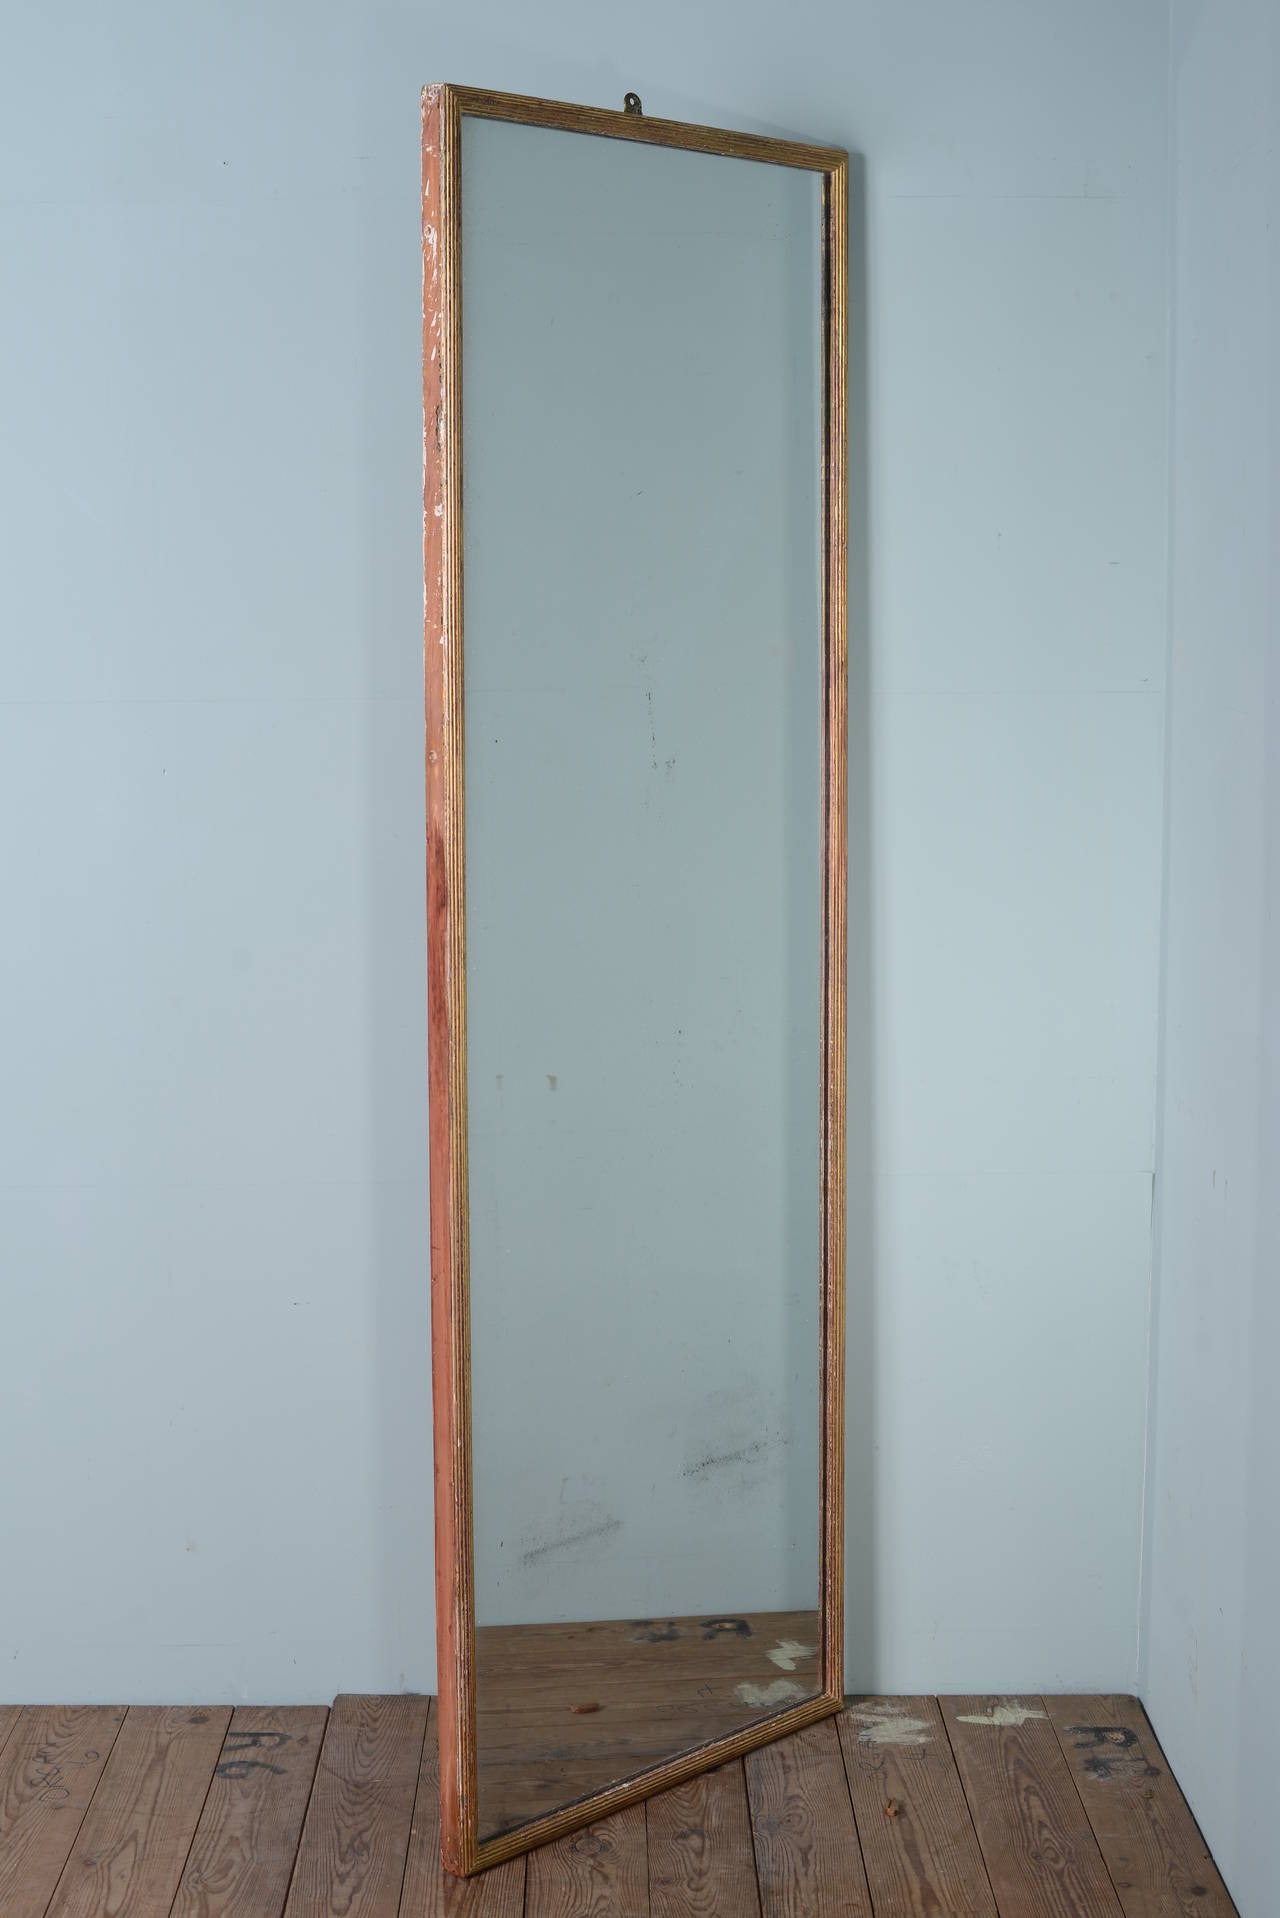 Reeded Gilt English Antique Mirror.
This is a lovely, very original, 19th century antique mirror, great proportions, perfect to use as a dressing mirror leant up against a wall.
The tall oblong mirror frame has a reeded design and is in the